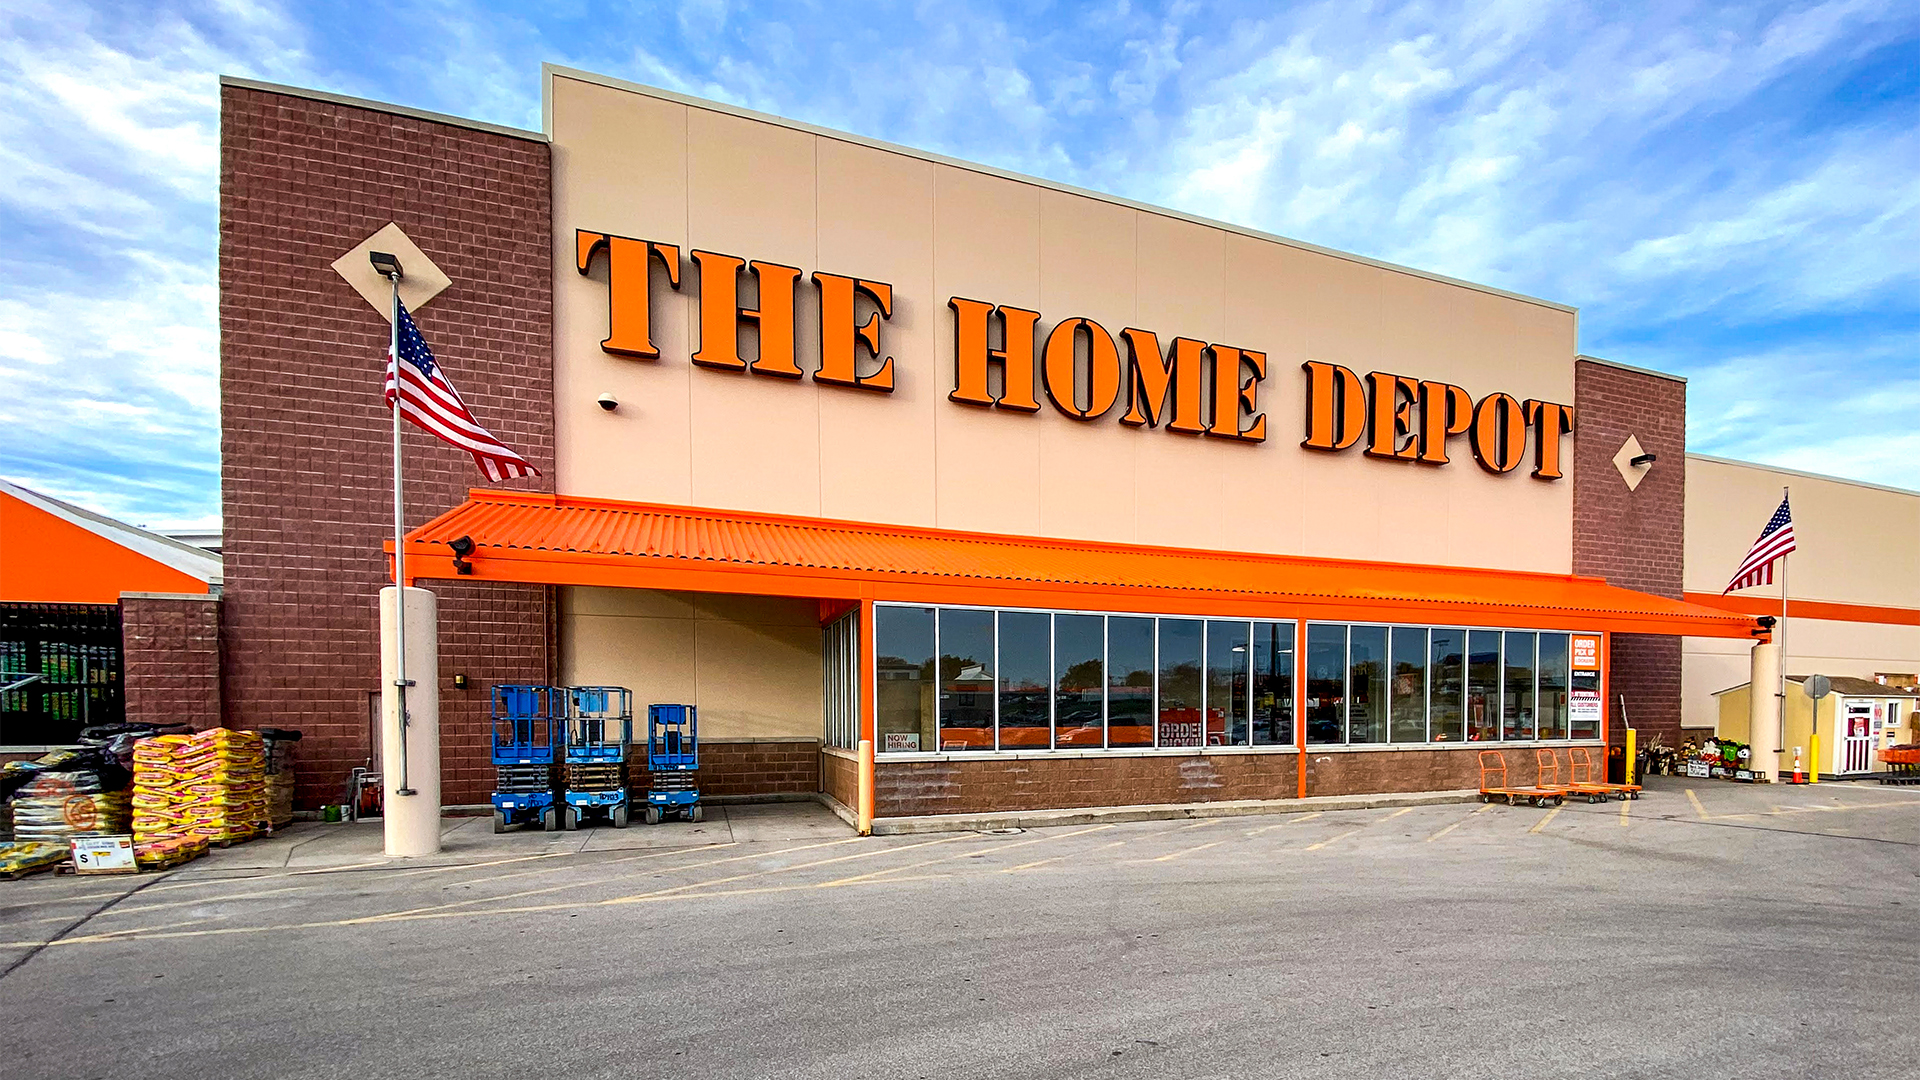 home depot mattresses in store